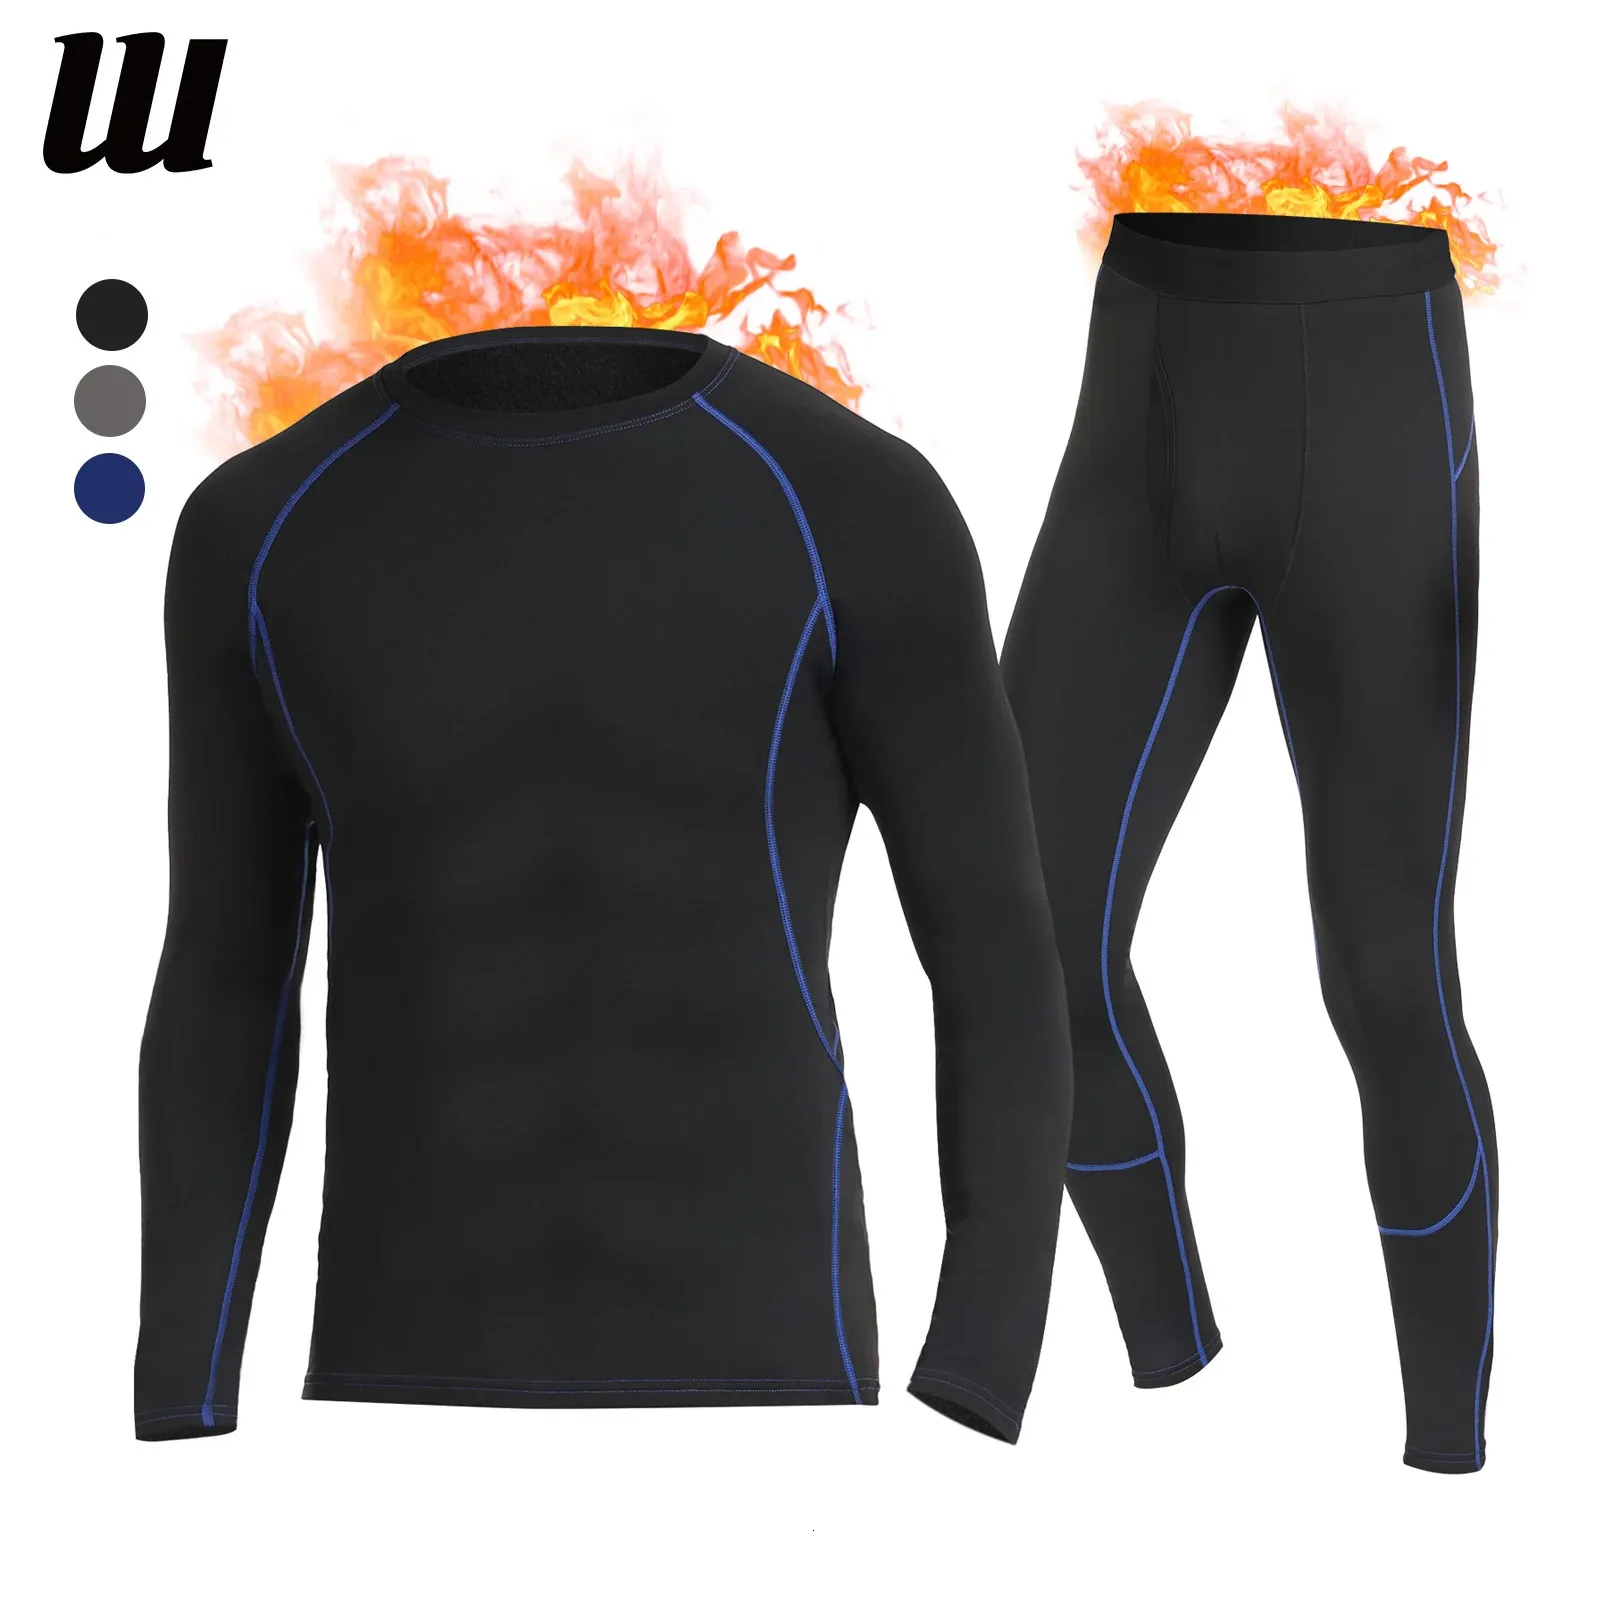 Winter Mens Thermal Base Layer Set Fleece Lined, Long Sleeve, Skiing/Hiking/Workout  From Huang03, $27.35